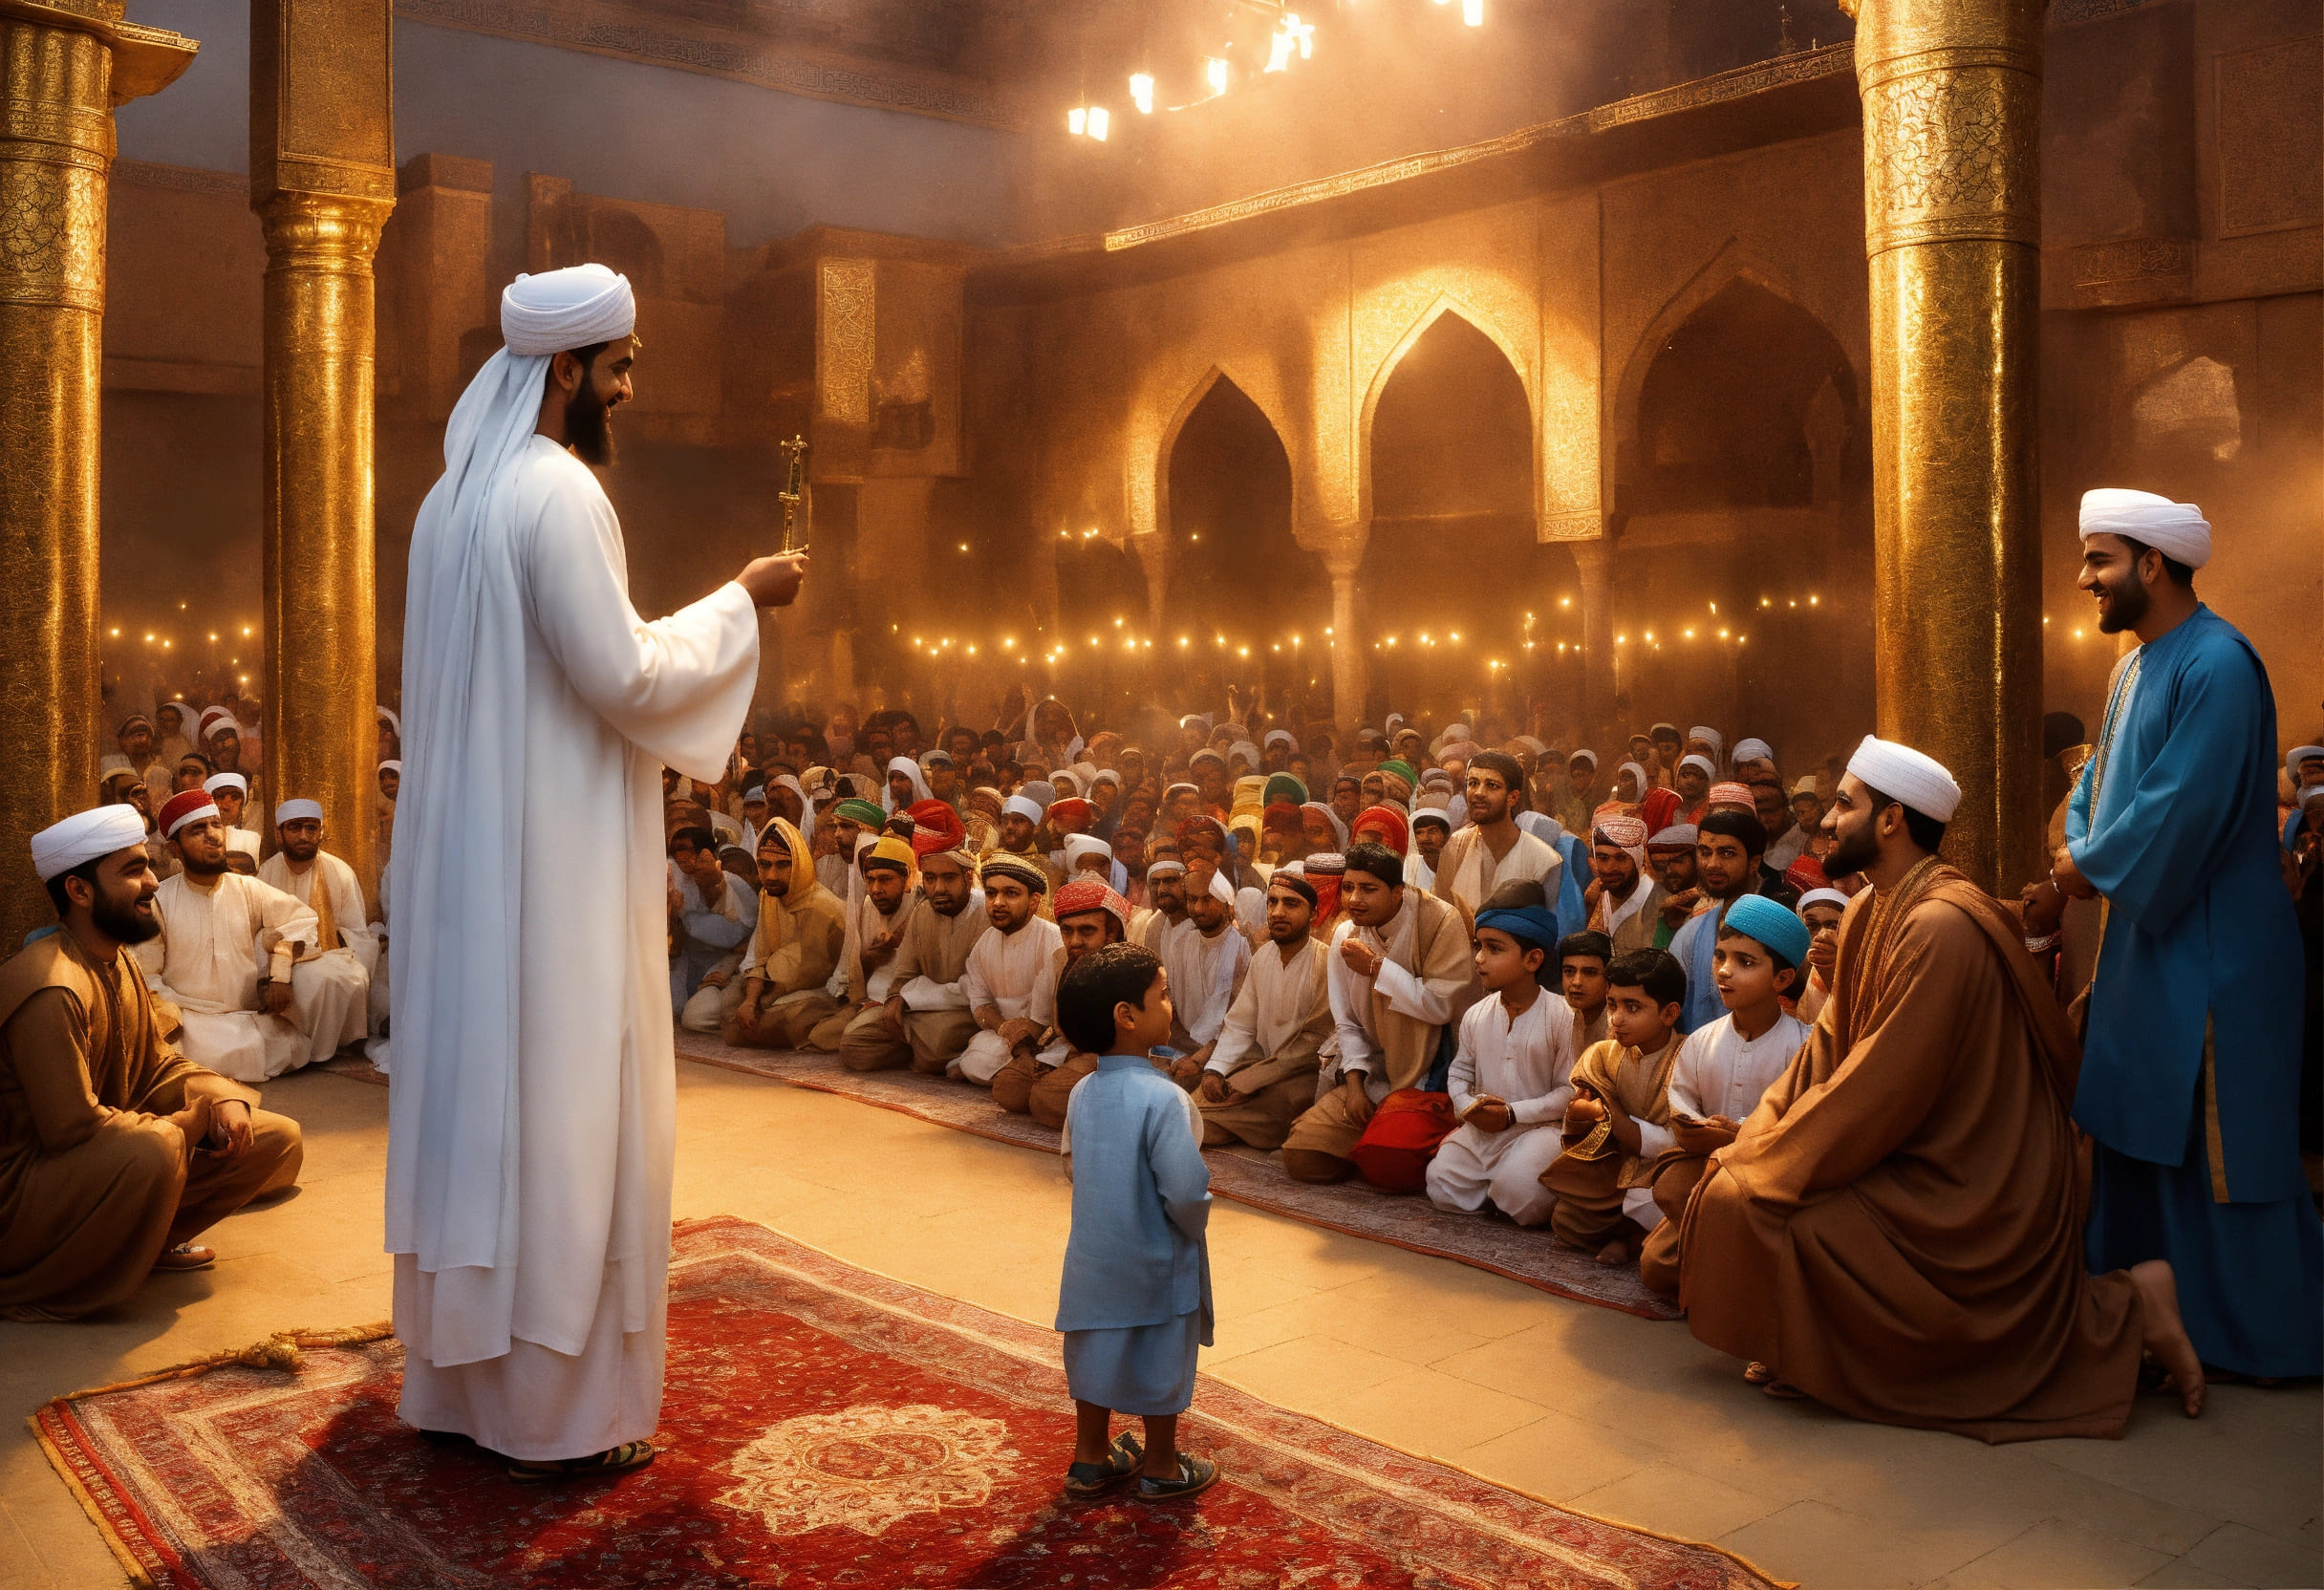 story of "ایک بچے کے ایمان کی ازمائش" (a test of a child's faith) as described in the provided text. capture the key moments and emotions of the story, including confrontation visualize the anger of the community leaders as they bring ibrahim in front of the crowd. ibrahim's faith highlight ibrahim's unwavering faith as he stands firm in his belief in allah. ibrahim removing the idols illustrate ibrahim courageously removing the idols and breaking them. triumph and success show ibrahim with a sense of accomplishment after he has removed the idols, with a smile on his face.